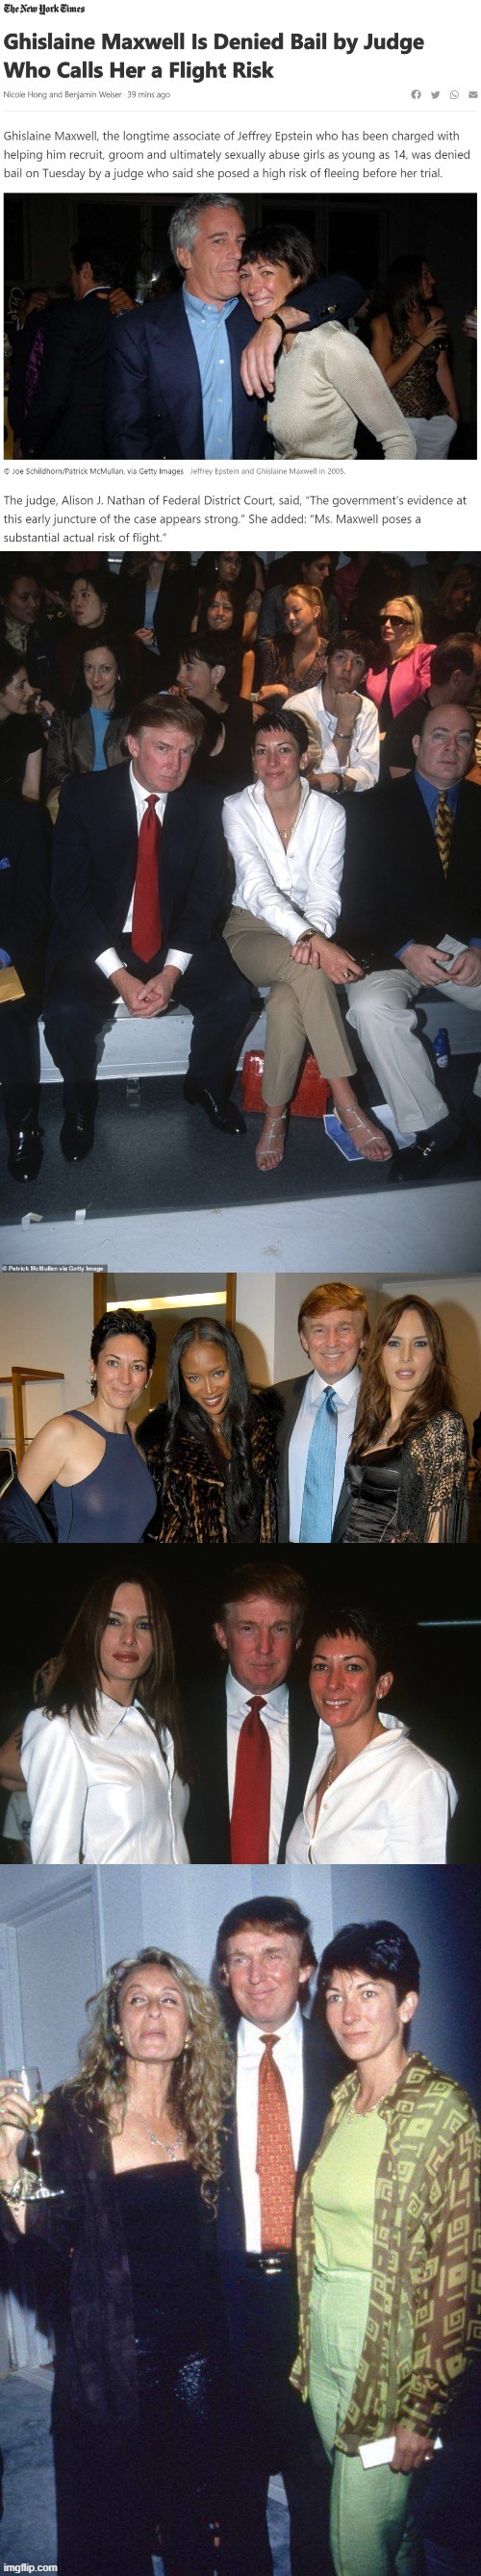 nothing much to see here, just some interesting news and interesting pictures | image tagged in pedophiles,pedophilia,epstein,jeffrey epstein,trump,pedo | made w/ Imgflip meme maker